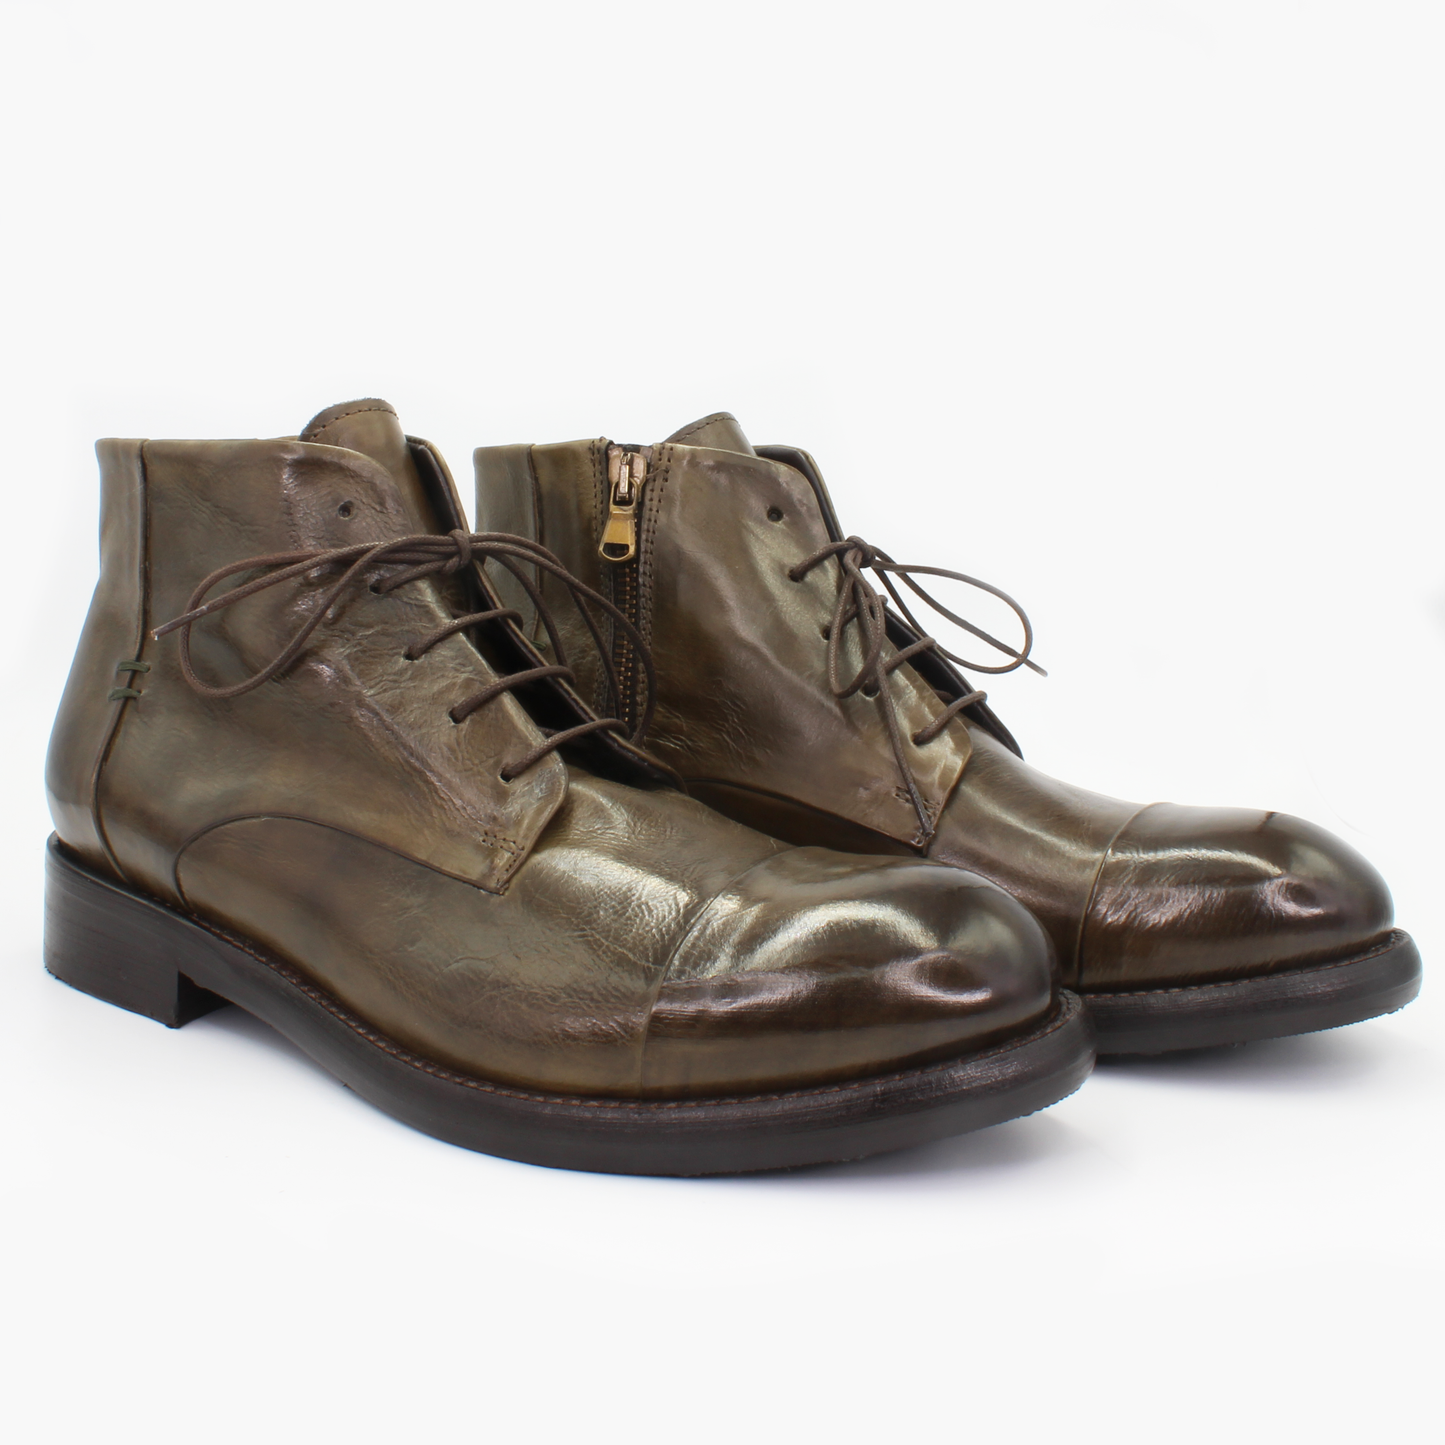 Shop Handmade Italian Leather Boot in Militare Green (JP36526/9) or browse our range of hand-made Italian boots for men in leather or suede in-store at Aliverti Cape Town, or shop online. We deliver in South Africa & offer multiple payment plans as well as accept multiple safe & secure payment methods.